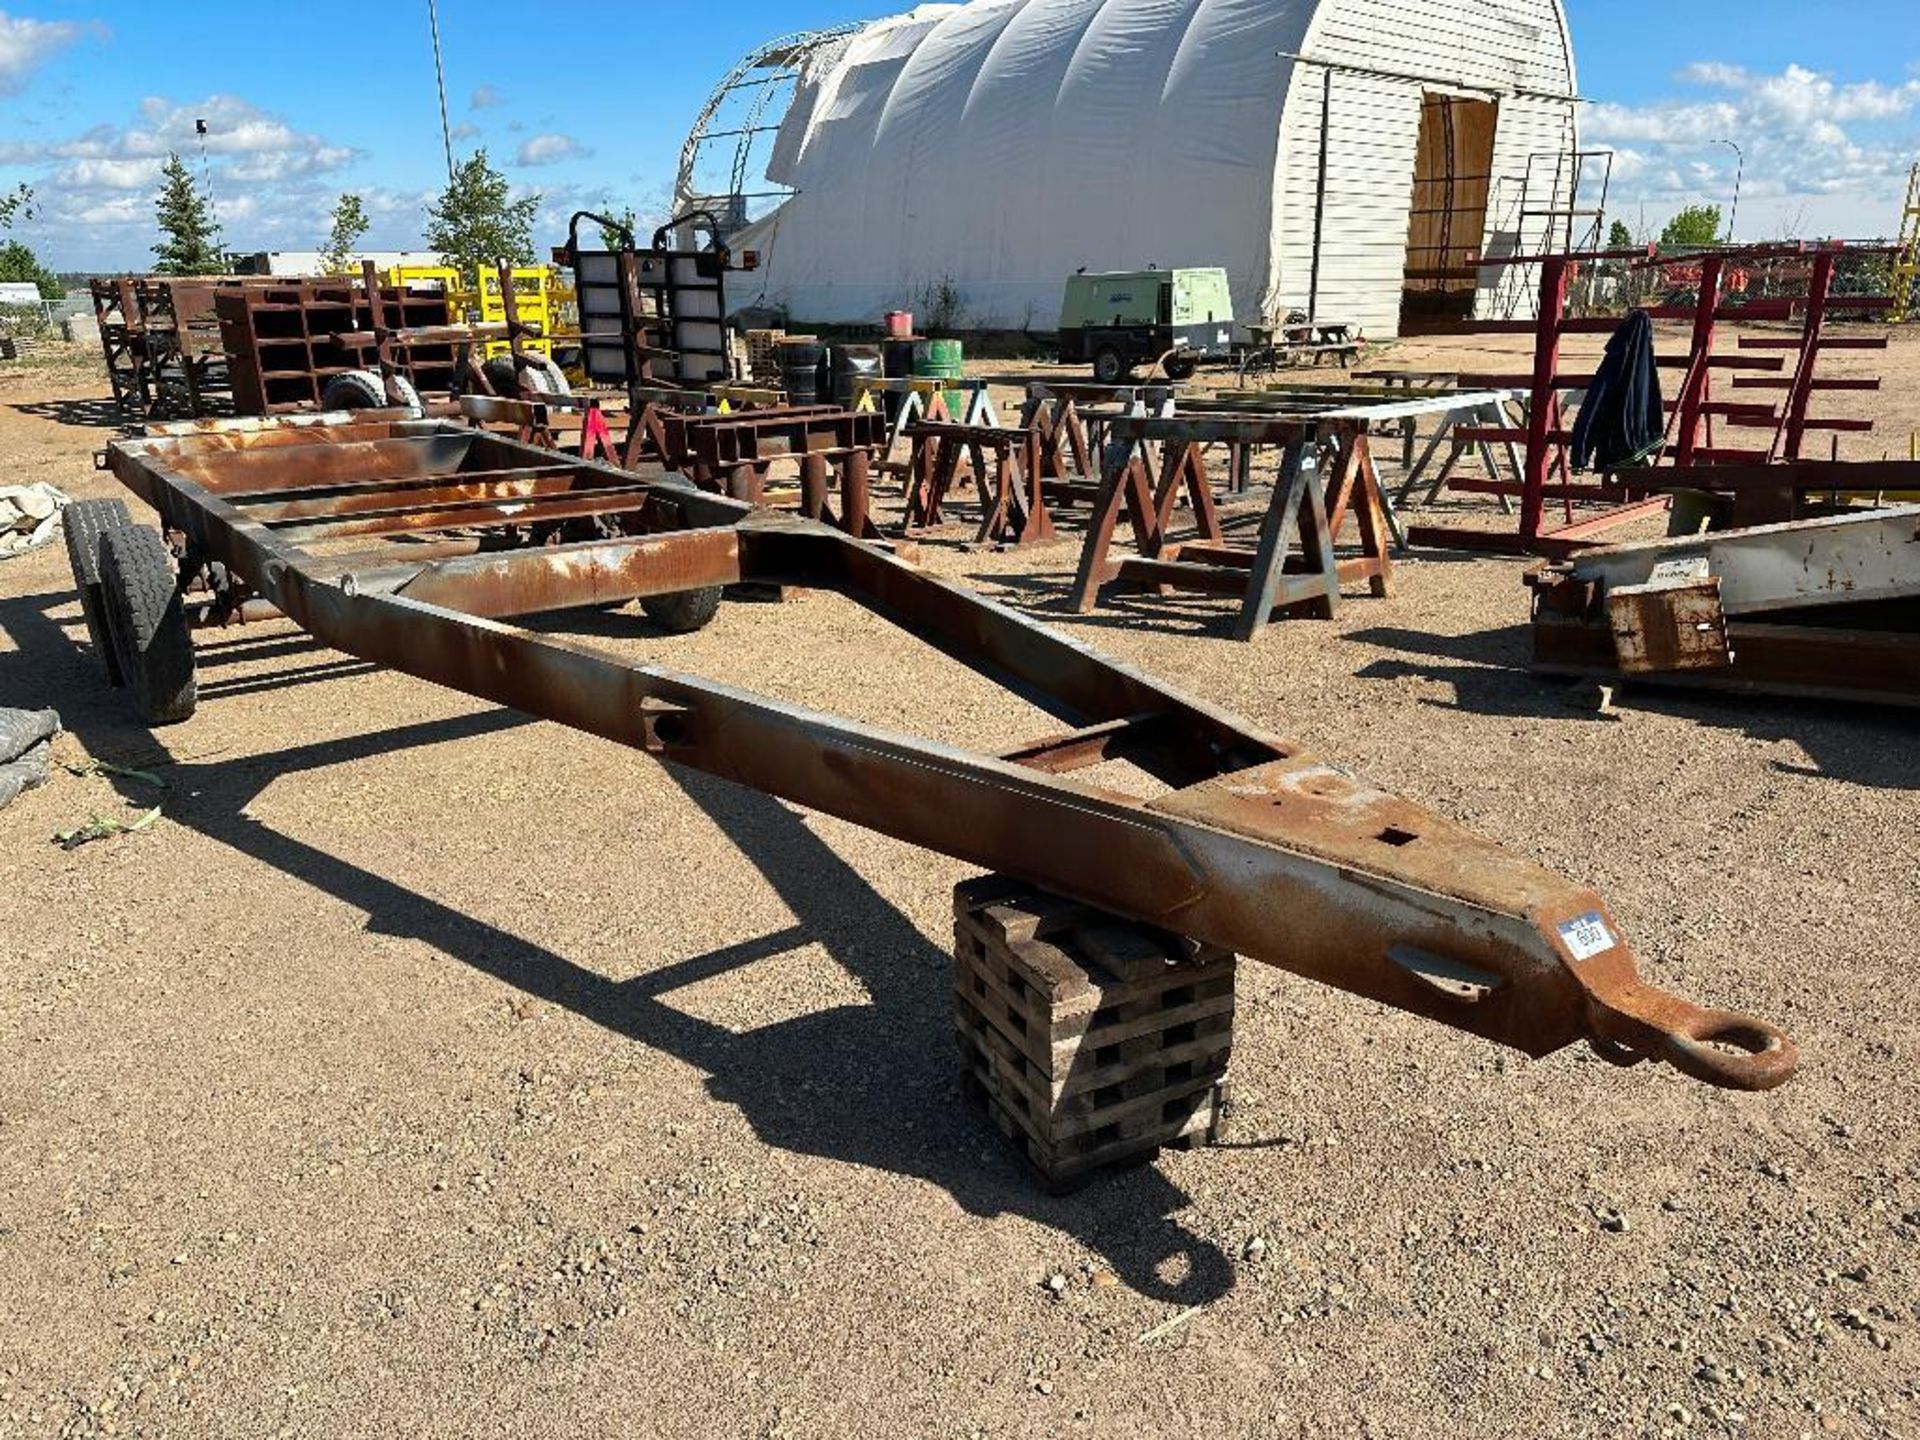 T/A Trailer Frame w/ Pintle Hitch, 14’ x 70” Deck Area, etc.